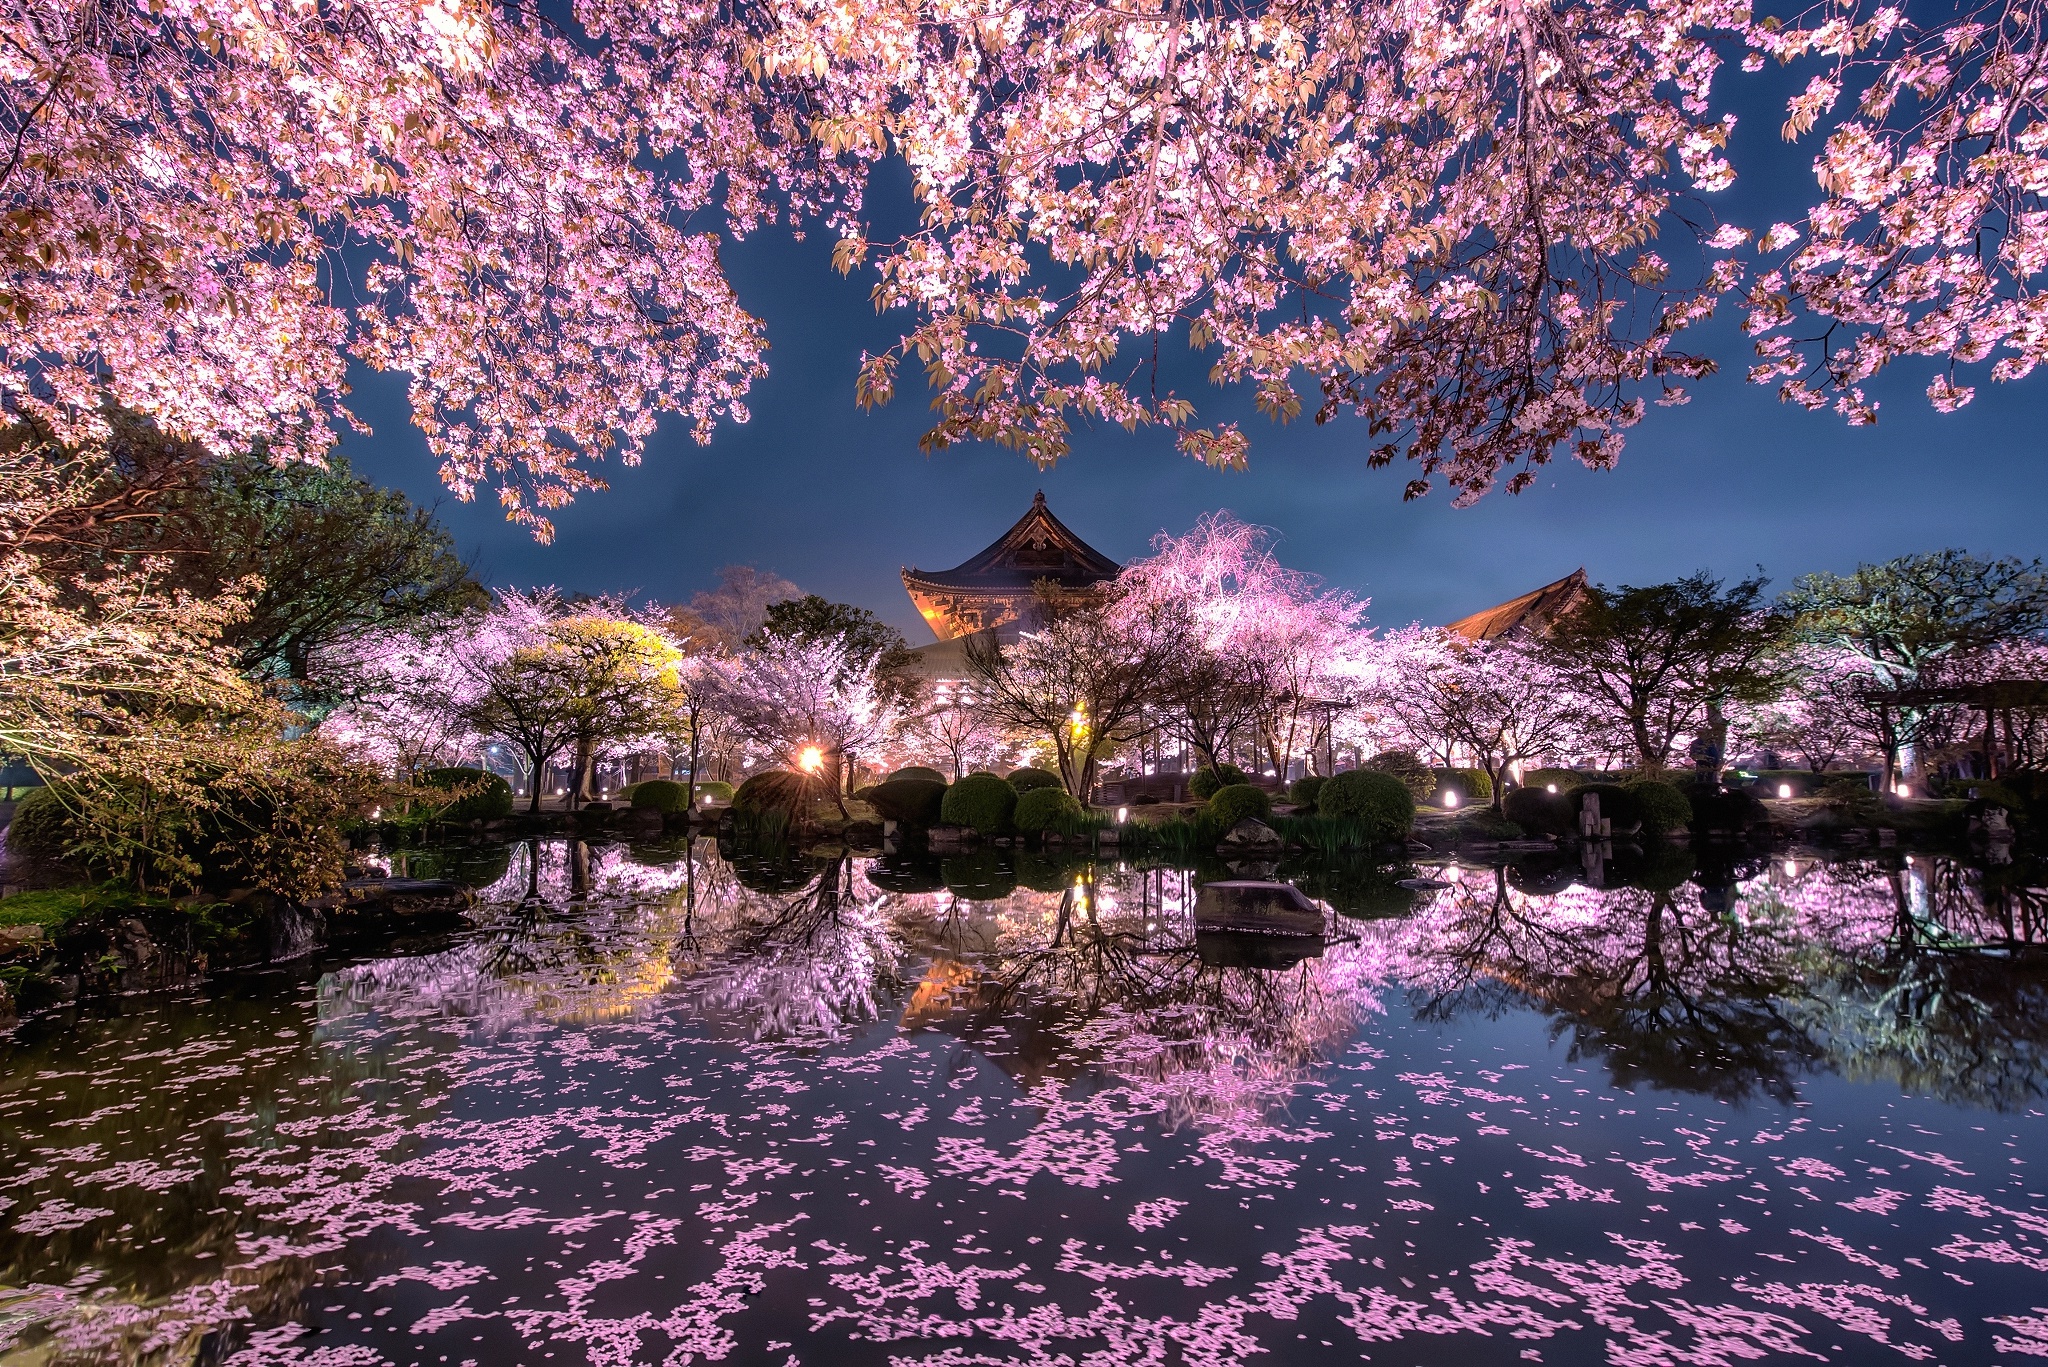 Reflection of Cherry Blossom Trees